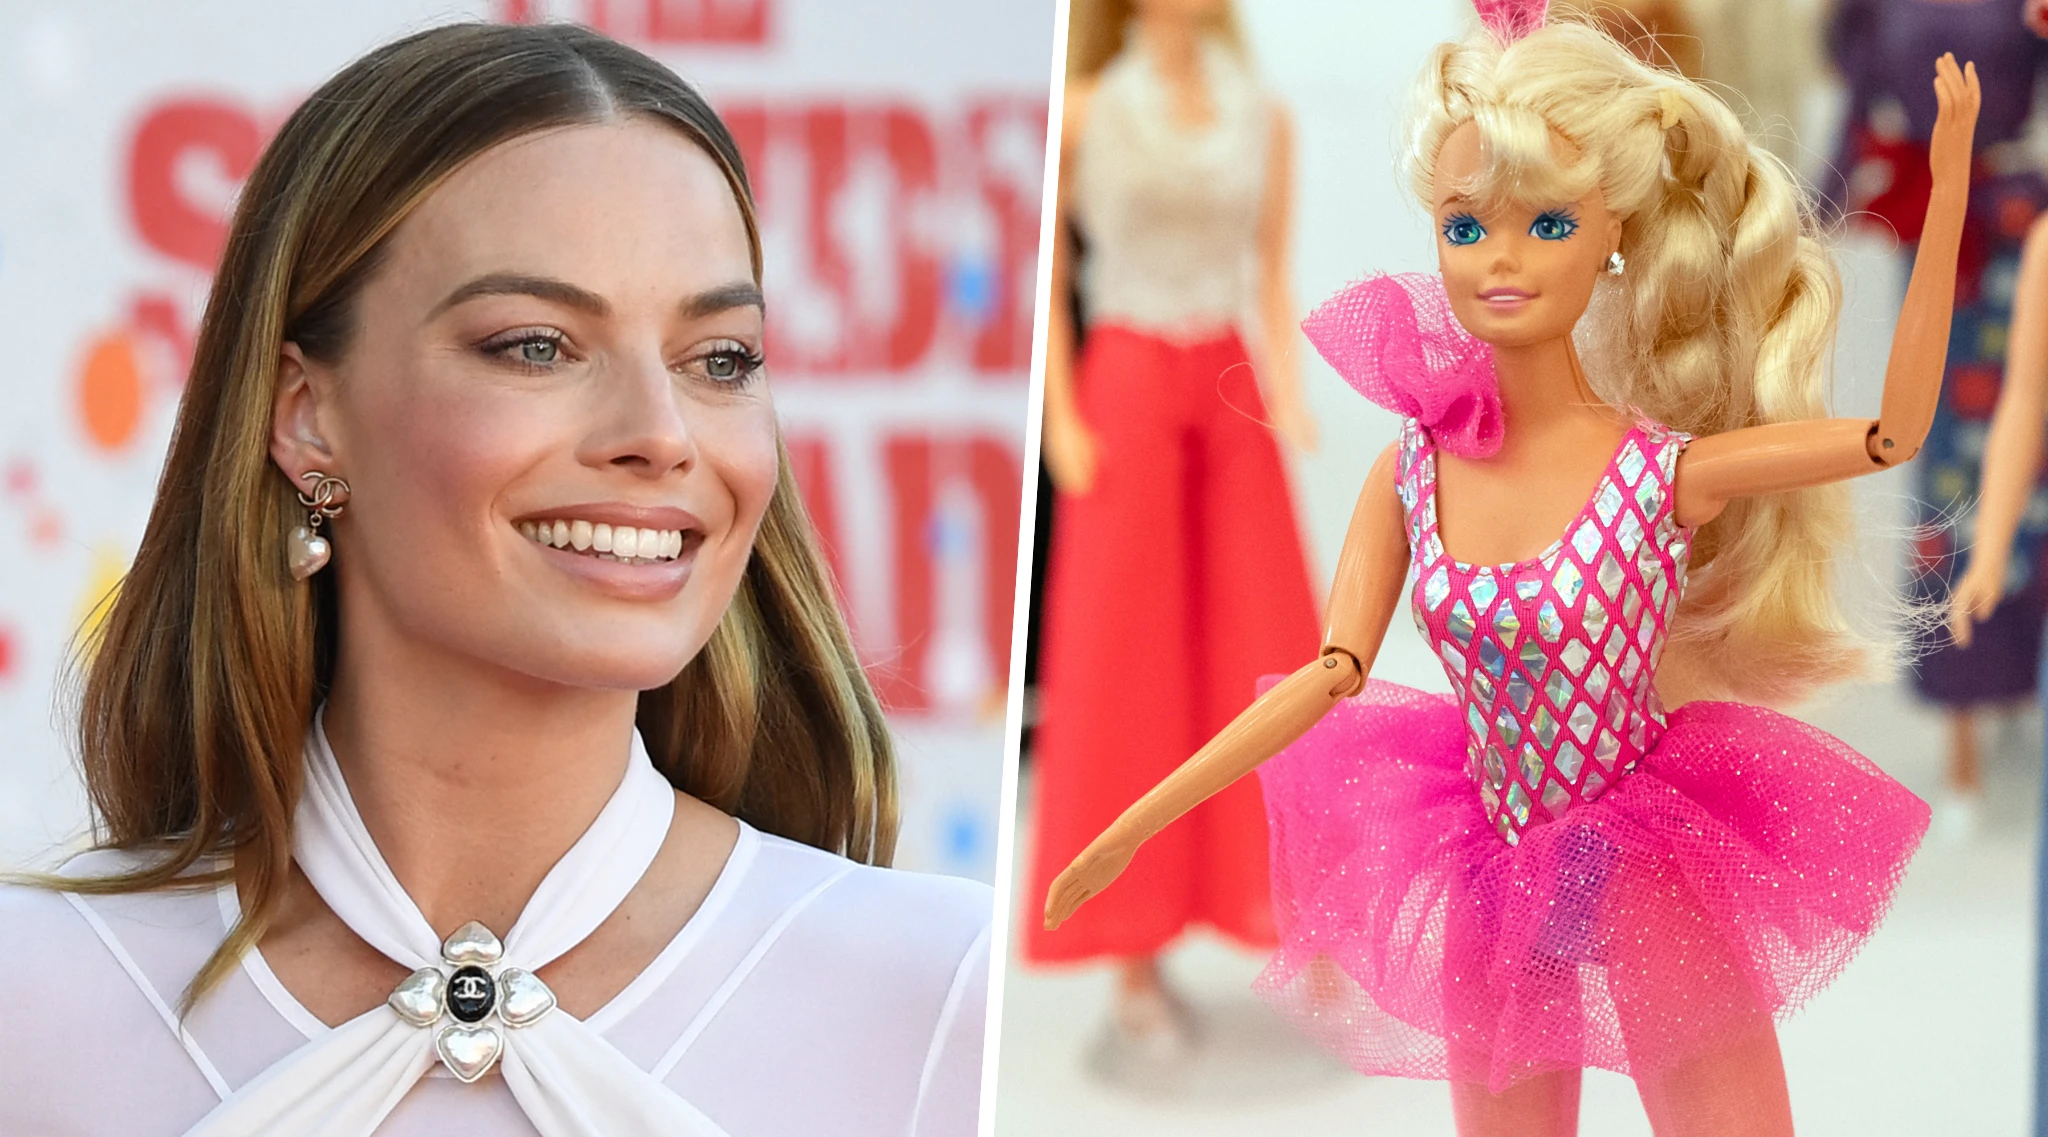 Check Out a First-Look Photo of Margot Robbie as 'Barbie' (Accessories Not Included)